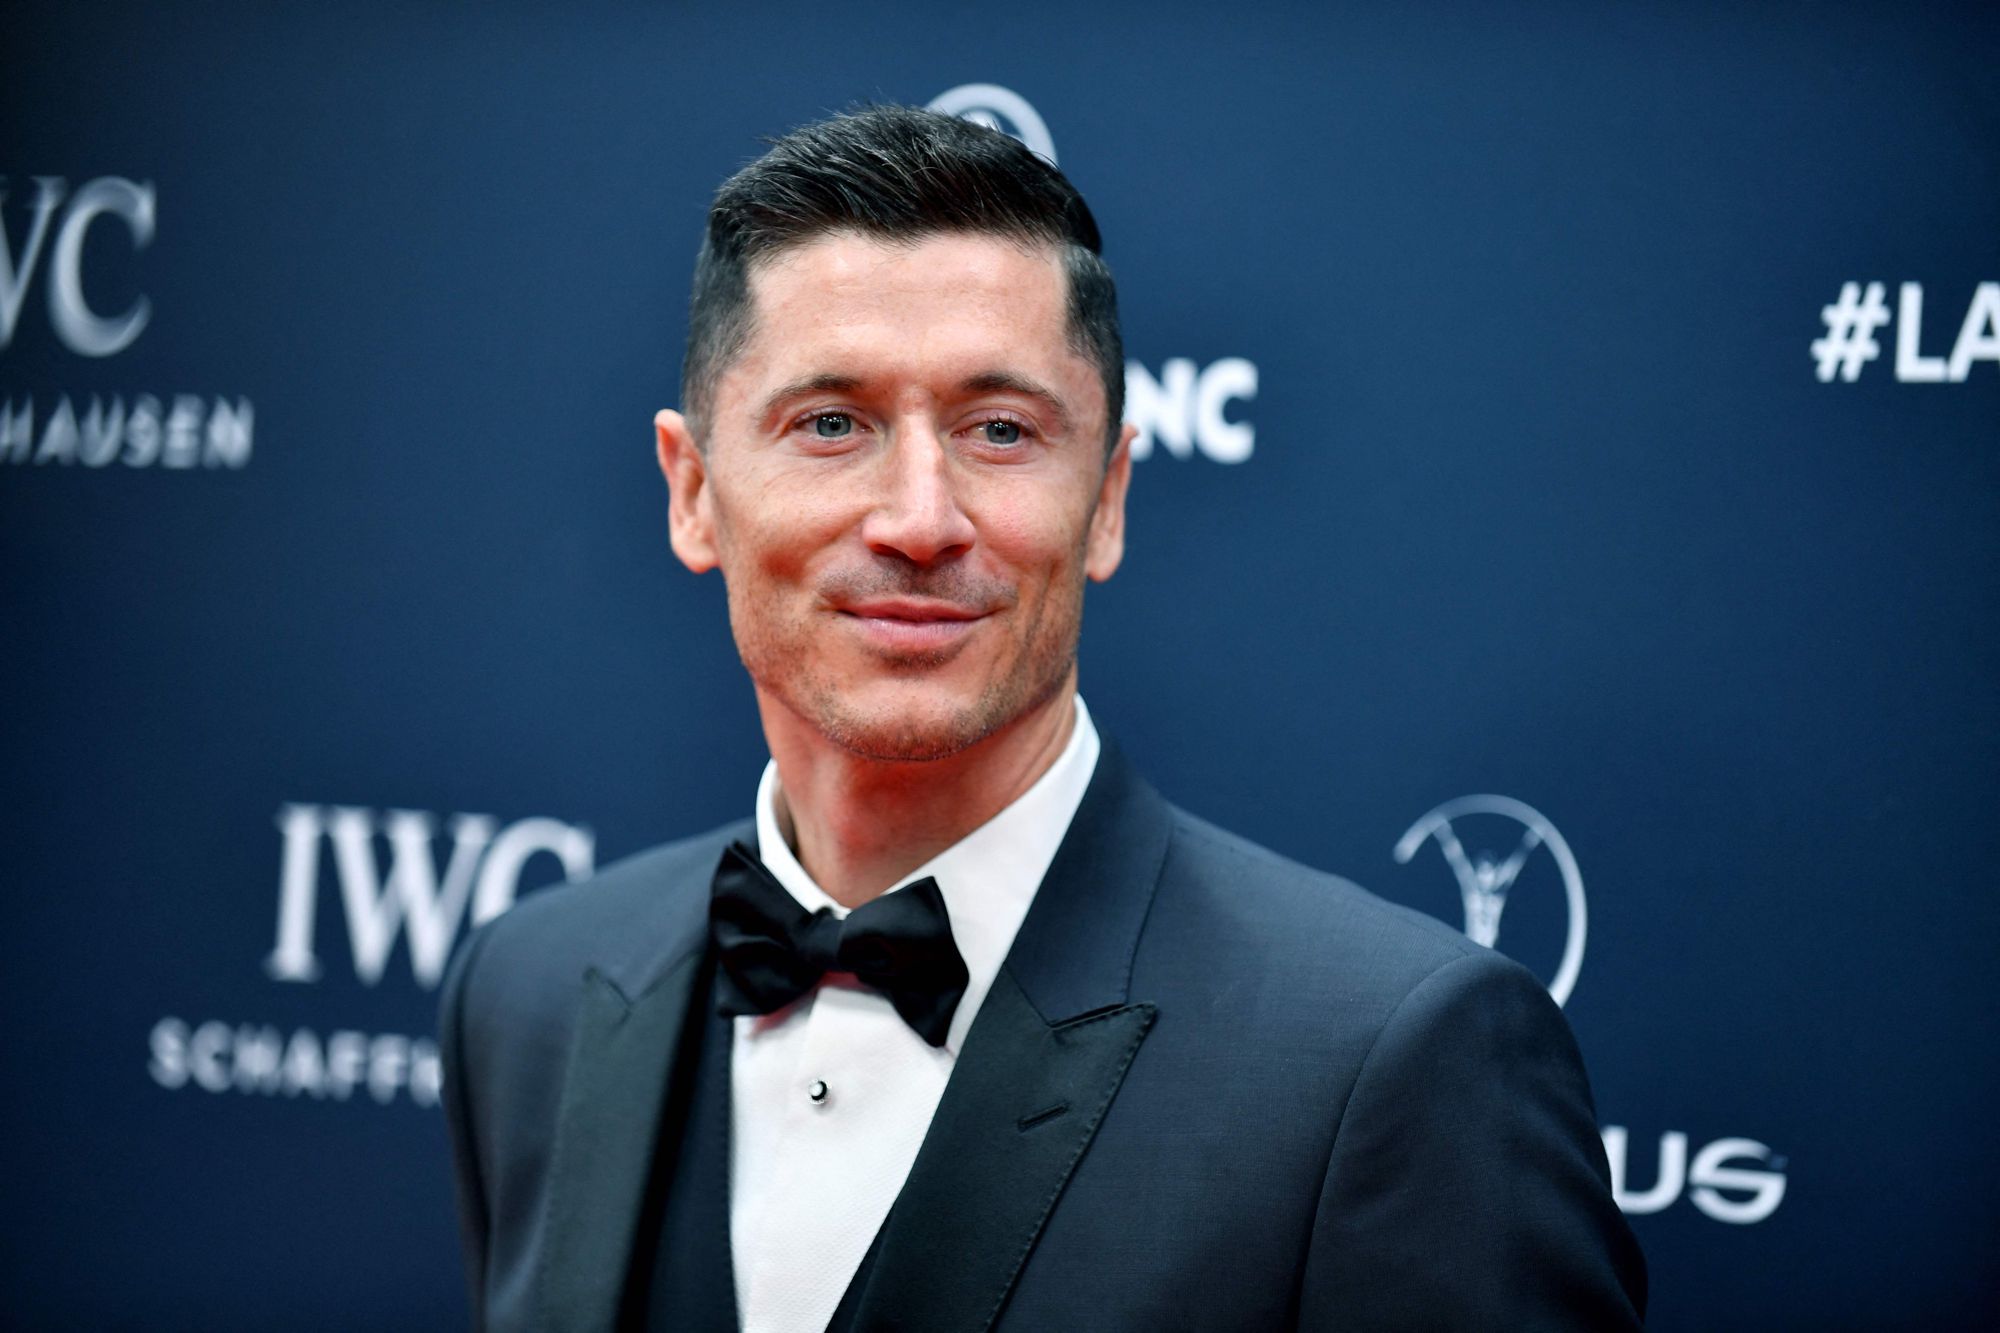 Polish football player Robert Lewandowski poses on the red carpet prior to the 2023 Laureus World Sports Awards ceremony in Paris on May 8, 2023. (Photo by JULIEN DE ROSA / AFP)